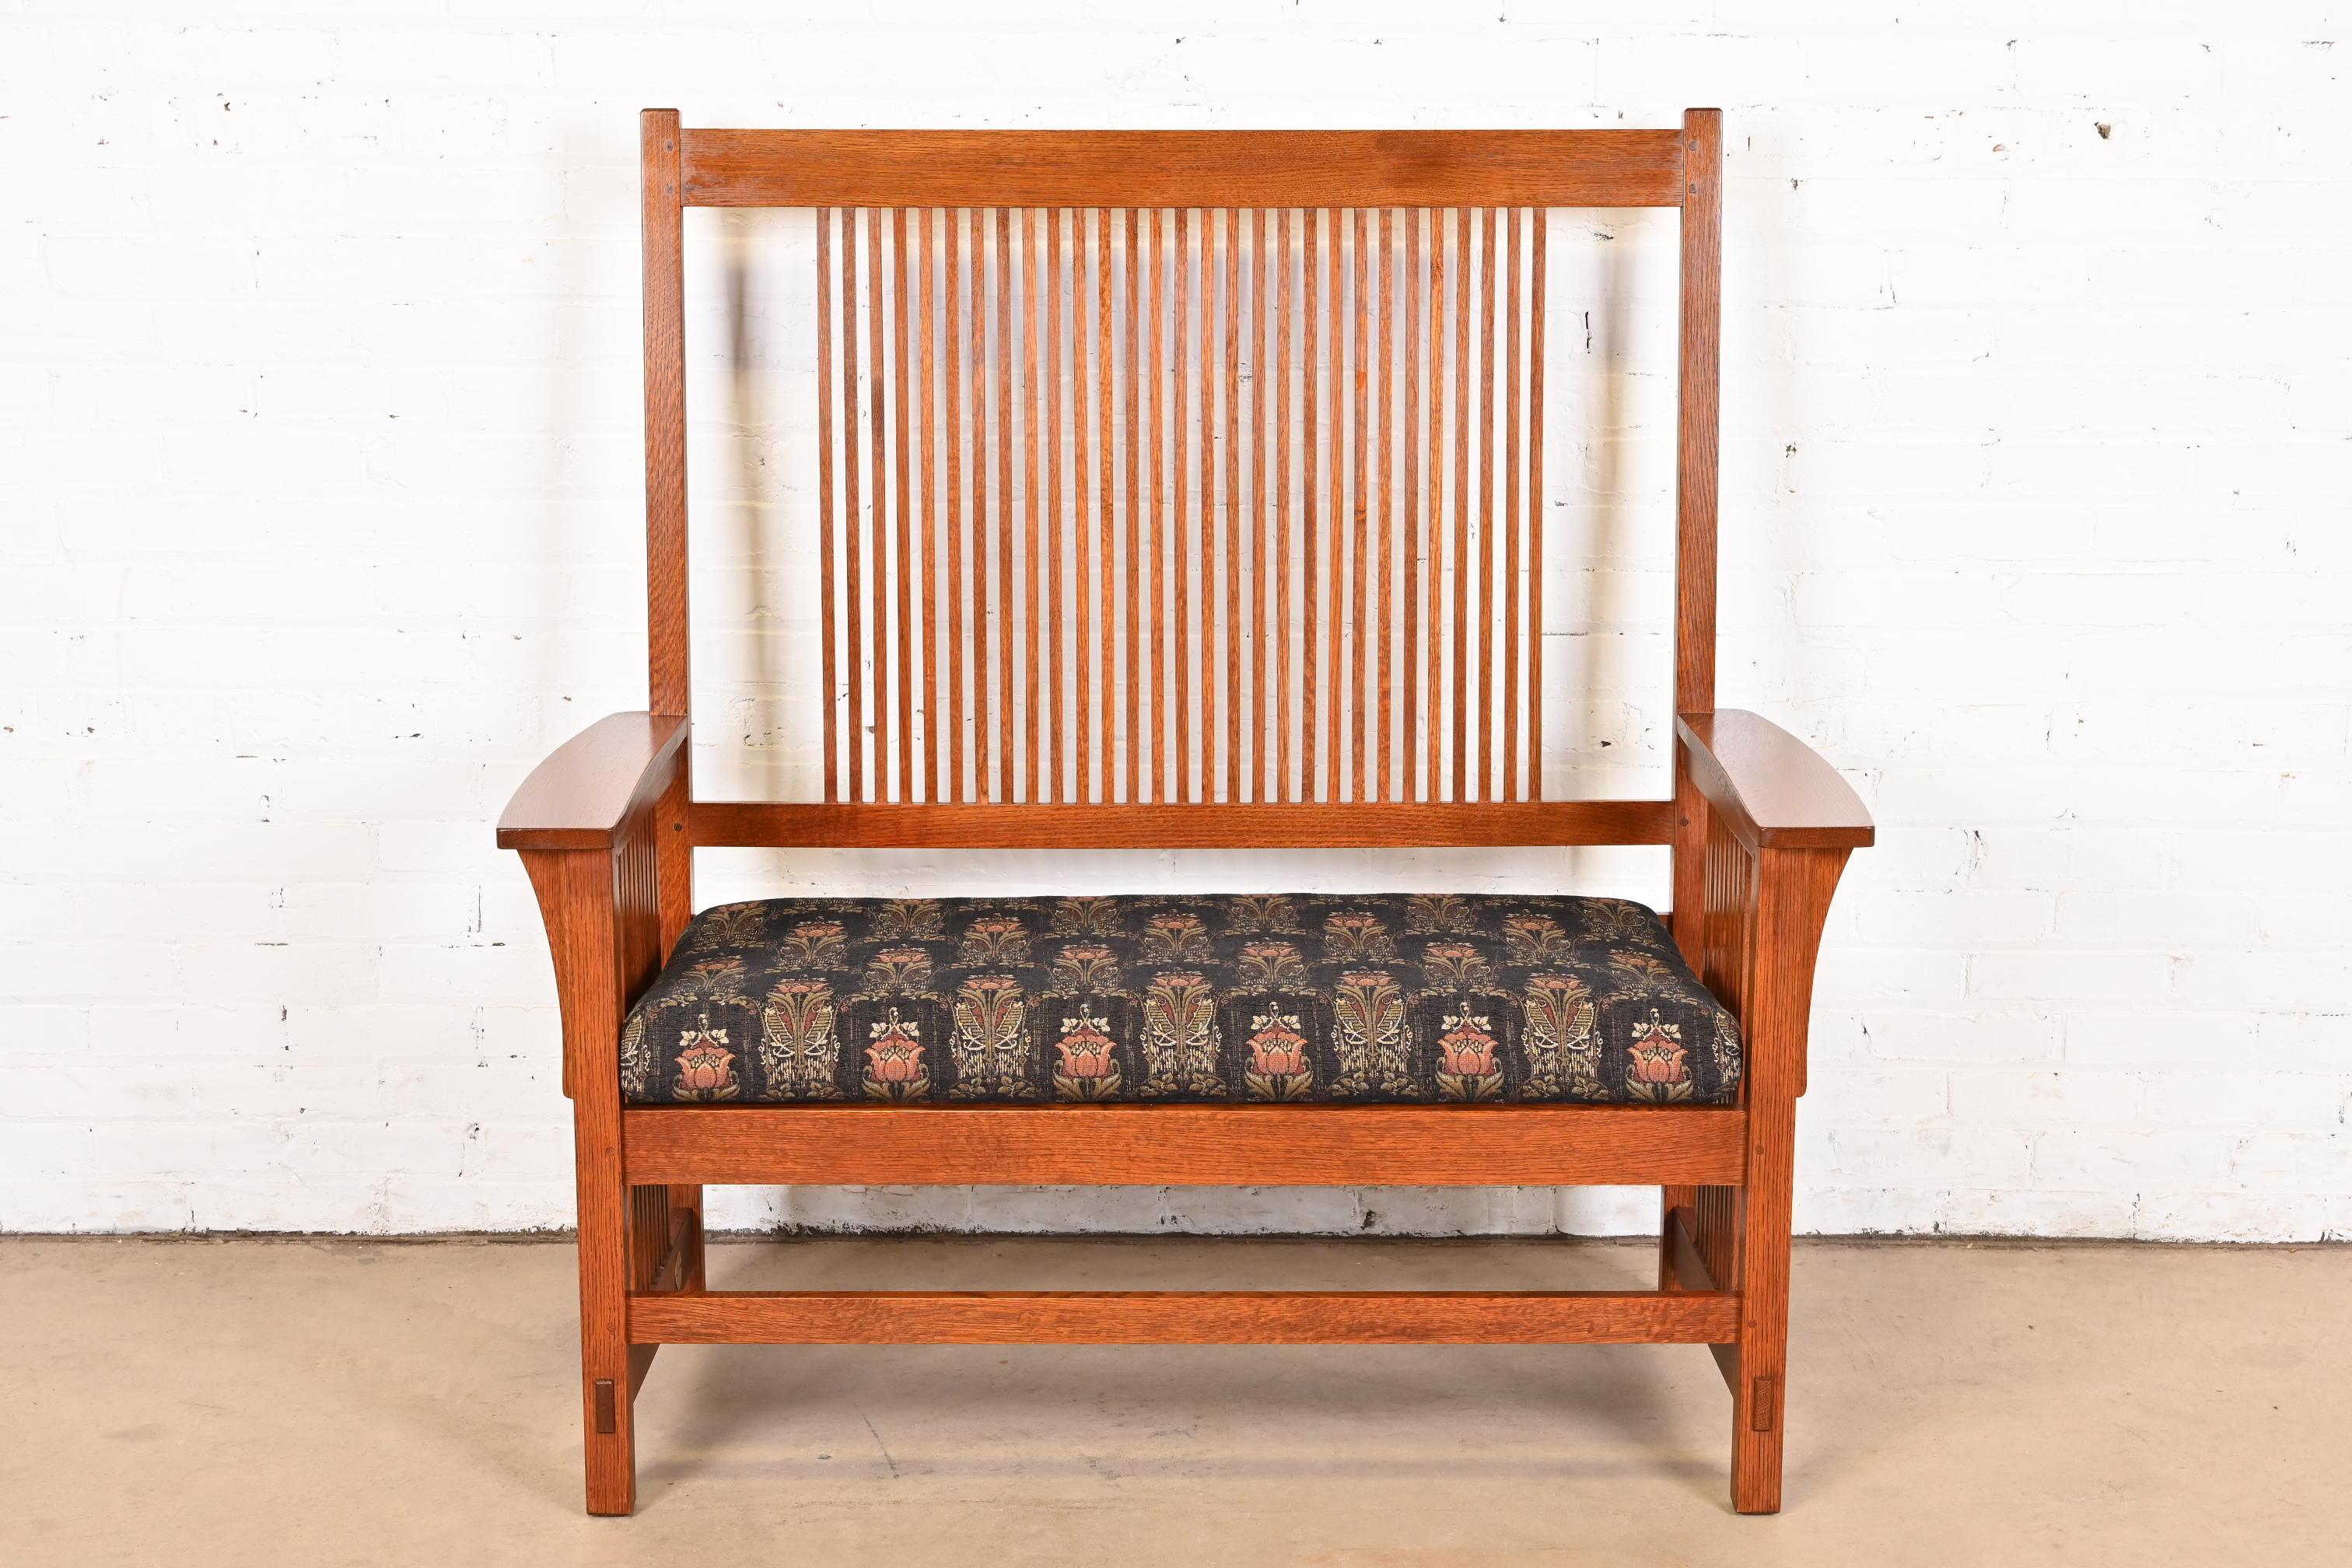 Stickley Mission Oak Arts & Crafts Spindle Bench or Settee In Good Condition For Sale In South Bend, IN